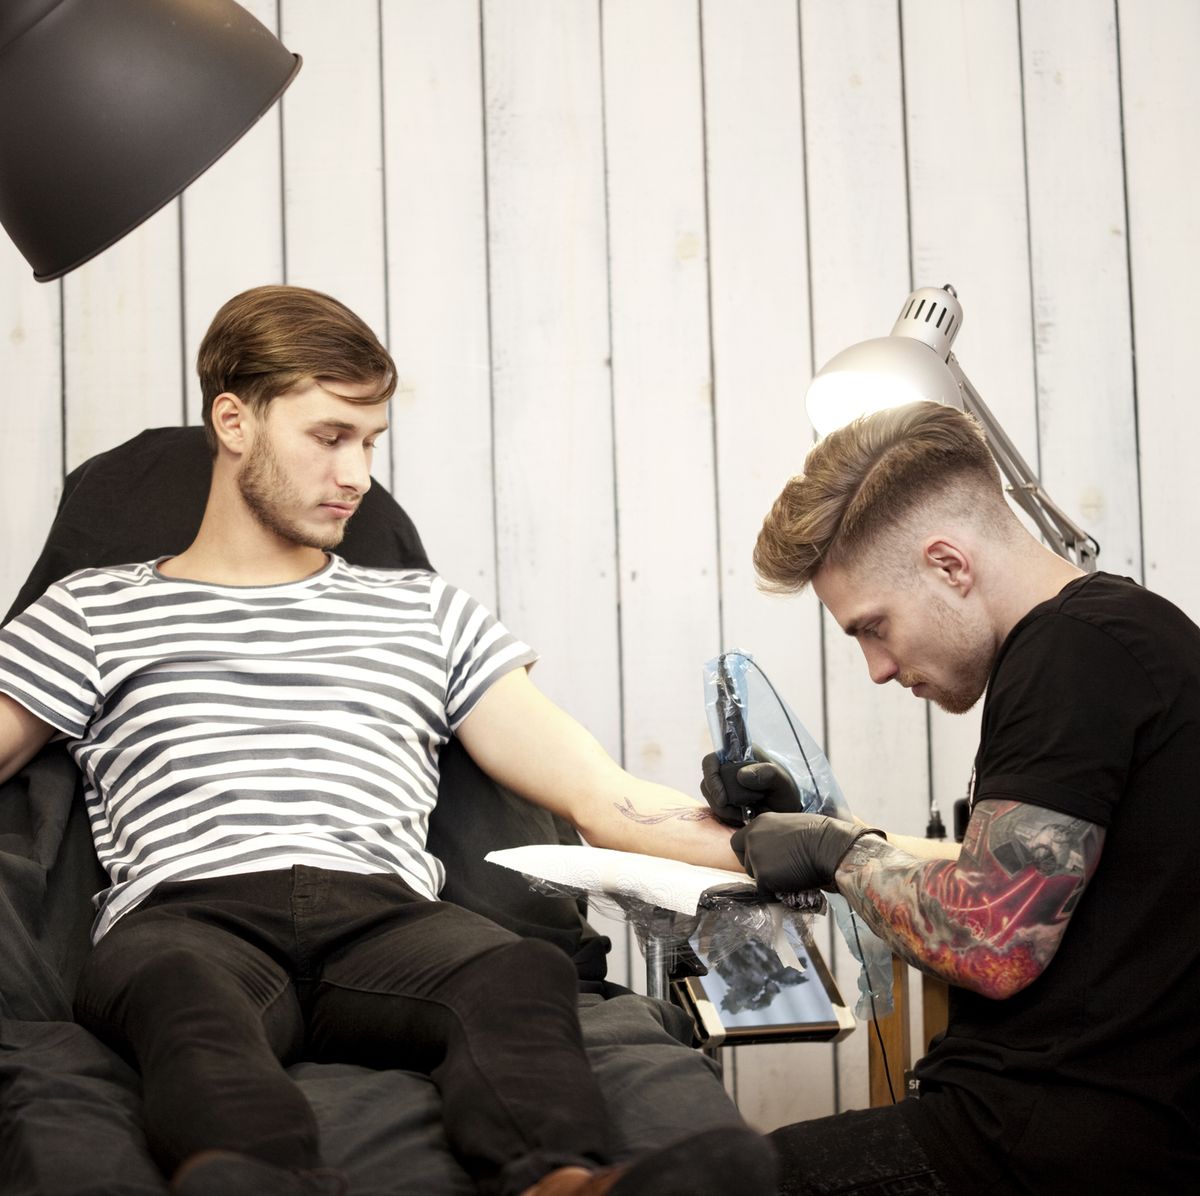 3 Things to Consider Before You Get Your First Tattoo